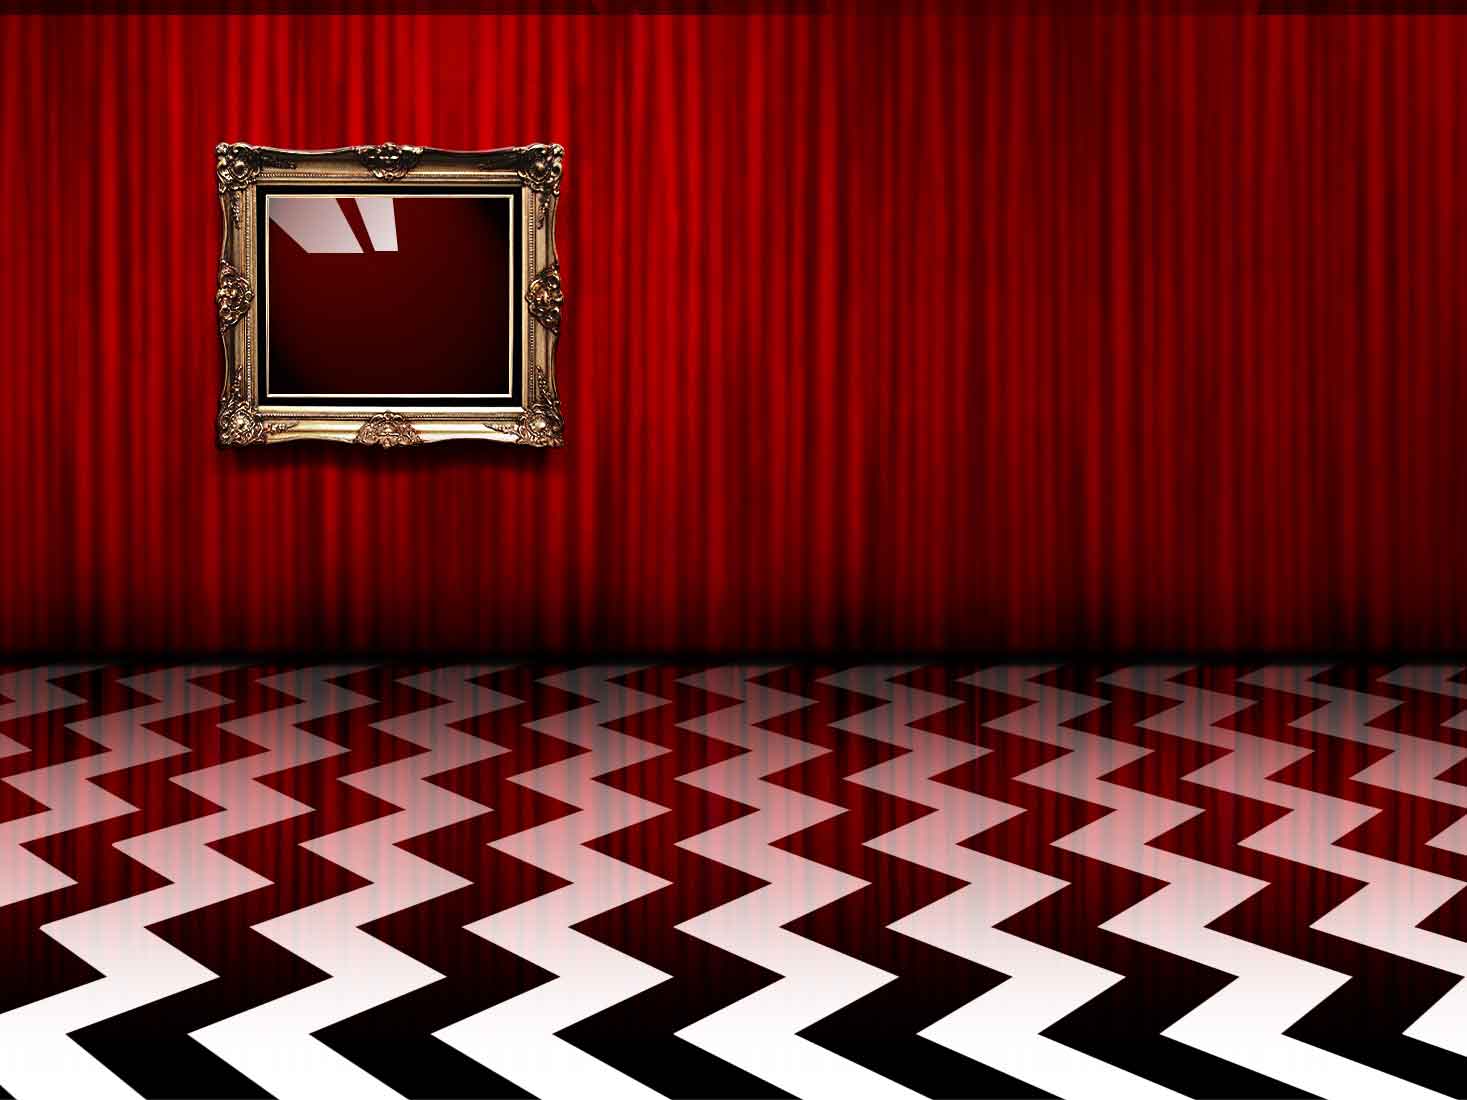 David Lynch And Twin Peaks Image - Palace Of Versailles - HD Wallpaper 